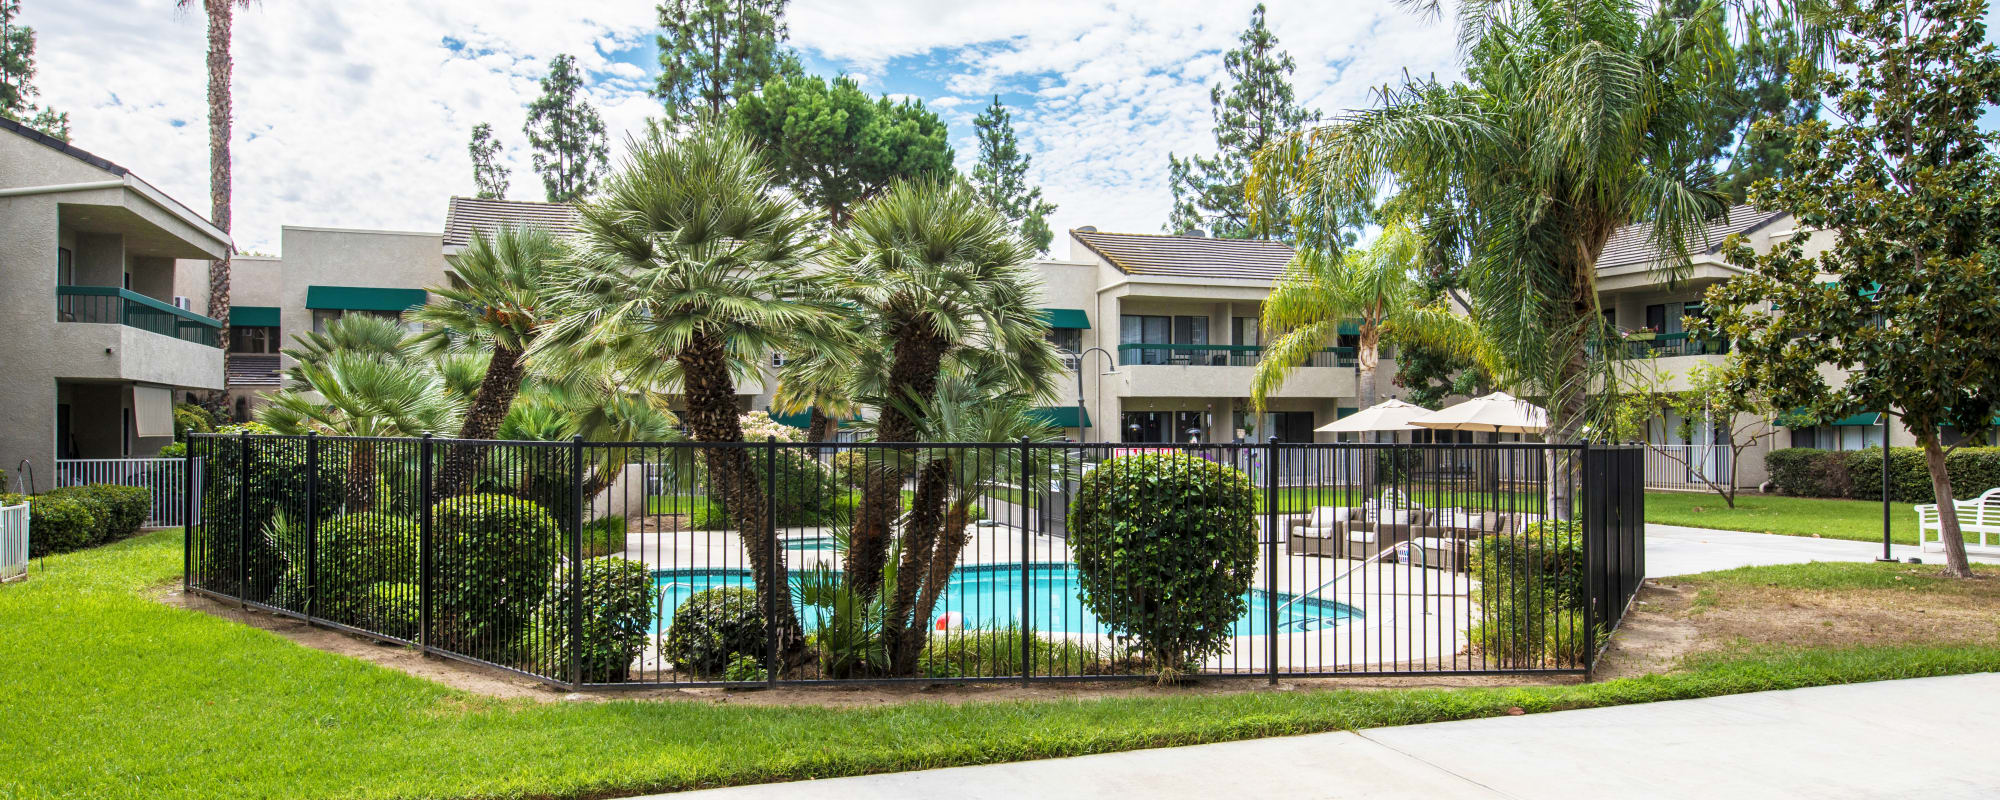 Citrus Place offers a swimming pool in Riverside, California